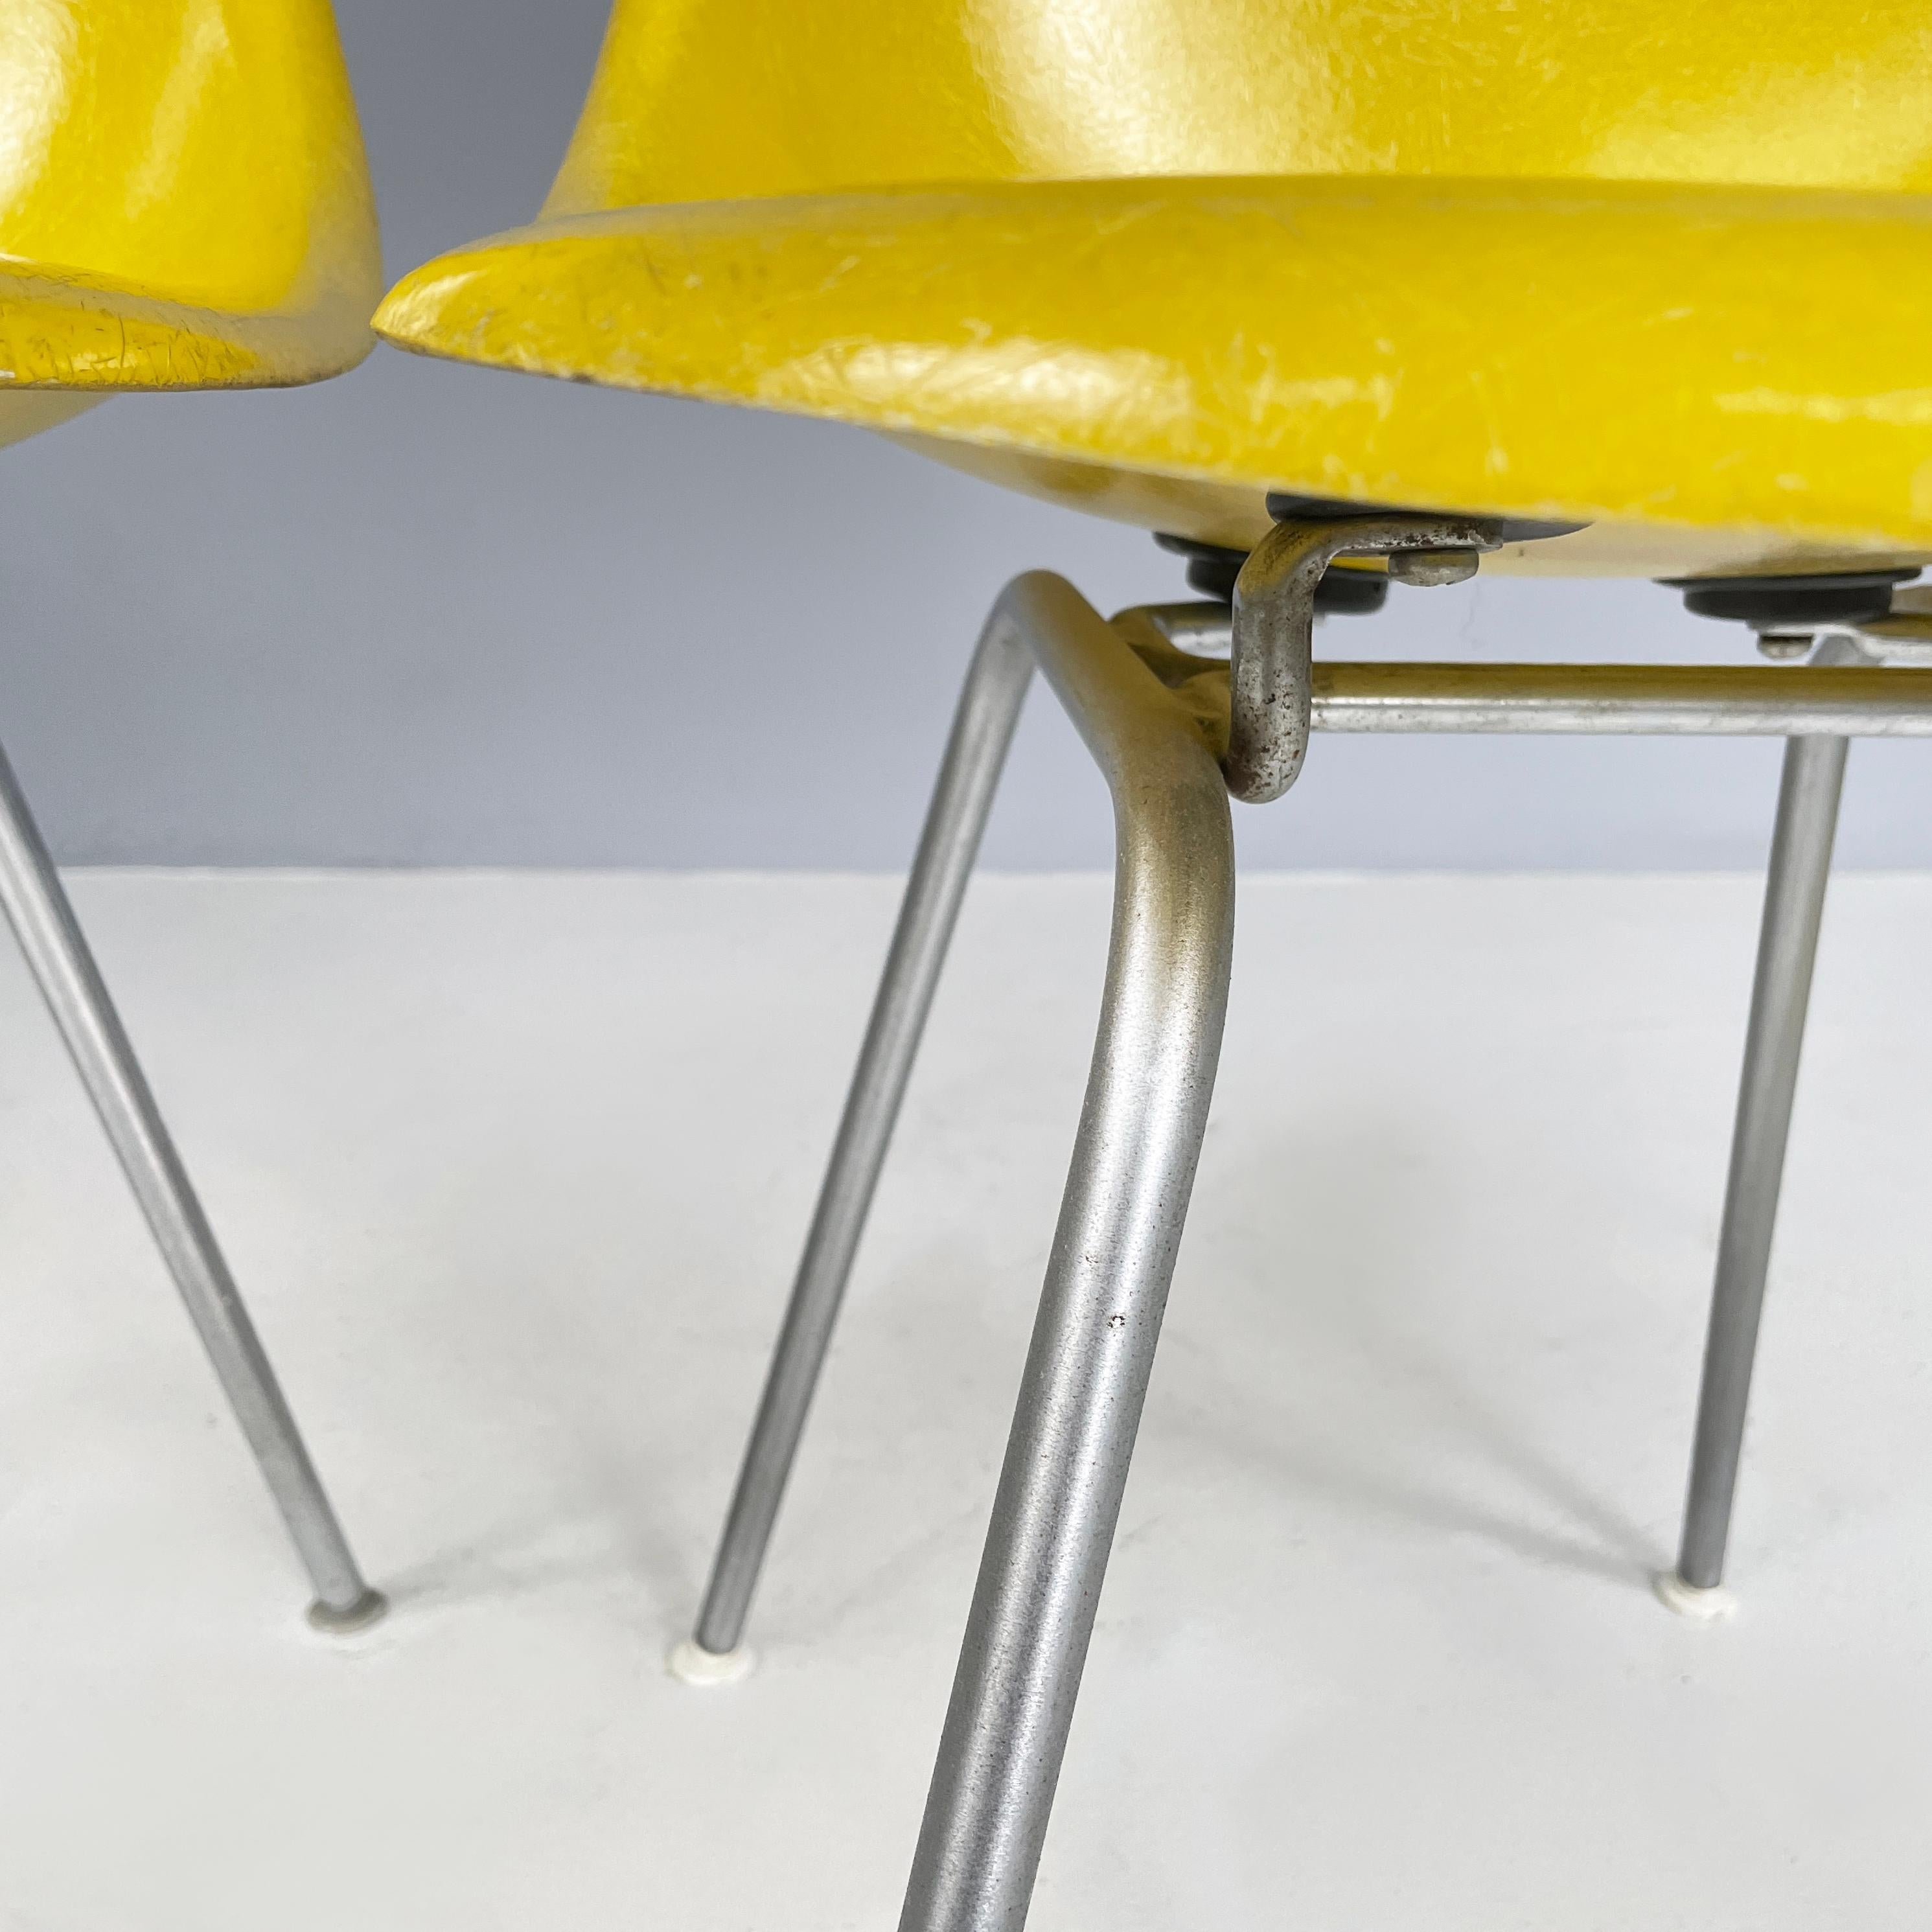 American Yellow Shell Chairs by Charles and Ray Eames for Herman Miller, 1970s For Sale 8